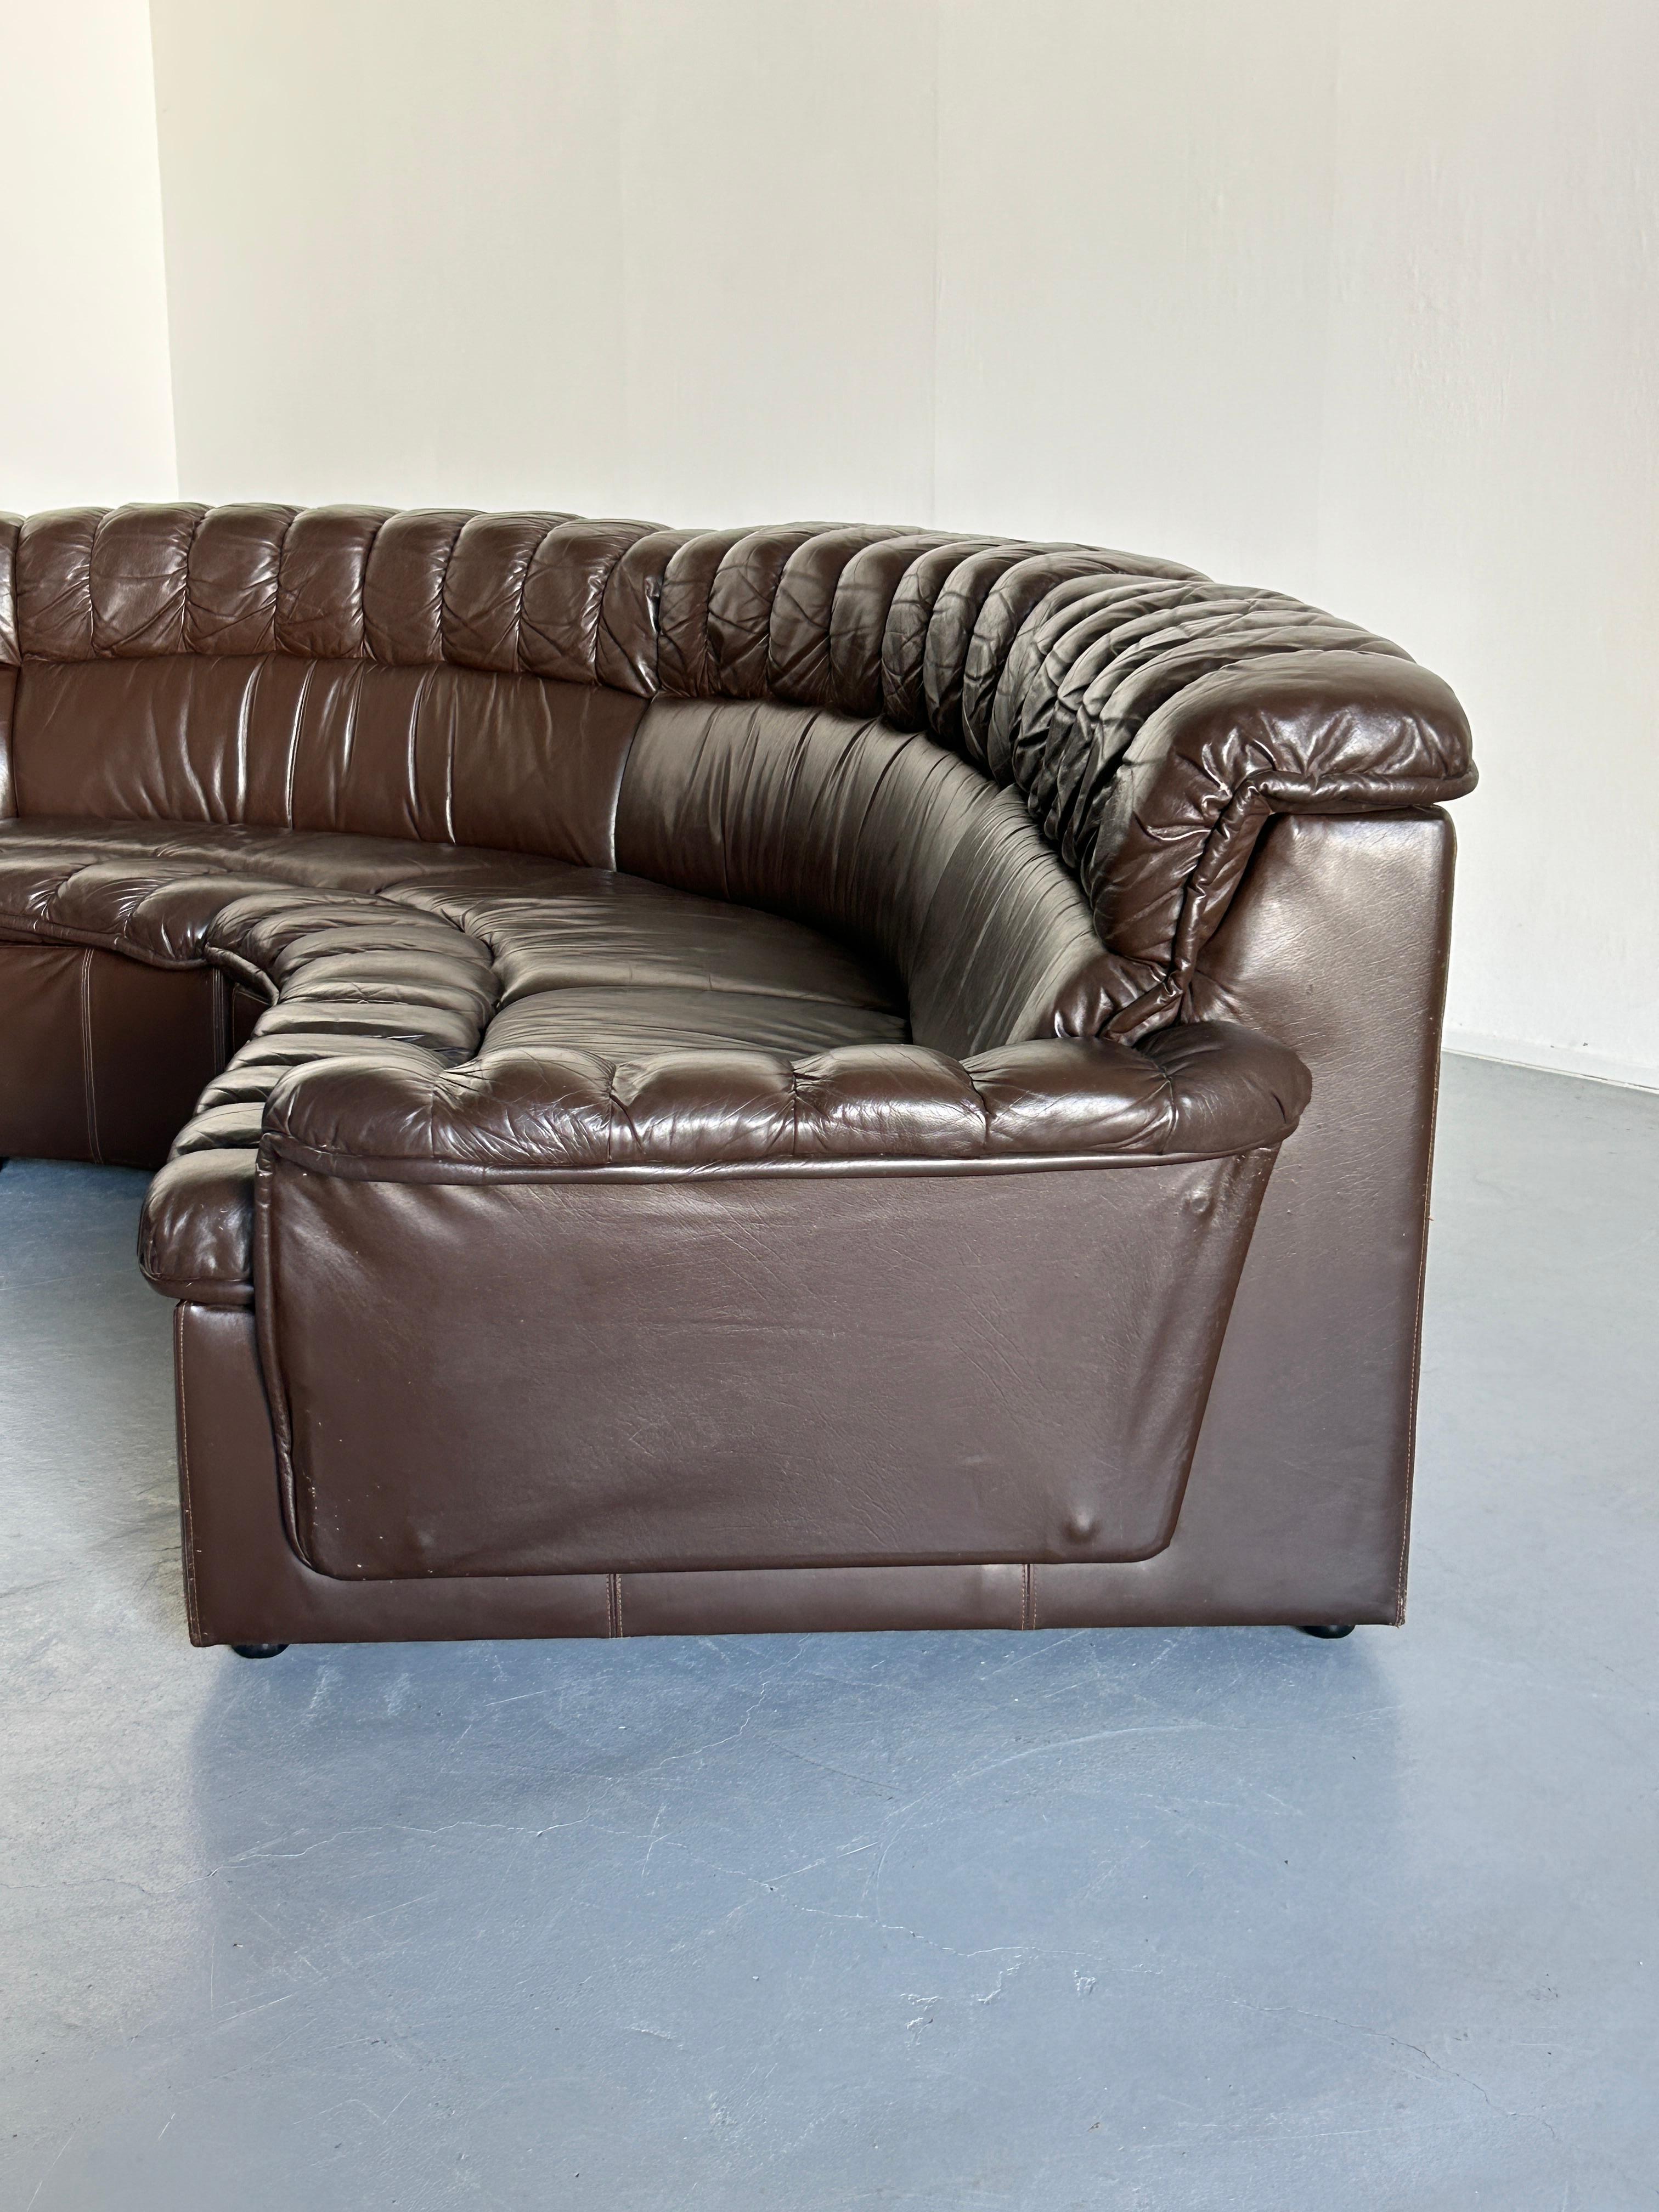 Mid-Century-Modern Leather Snake Sofa in style of De Sede DS-600 Non-Stop, 1970s For Sale 4